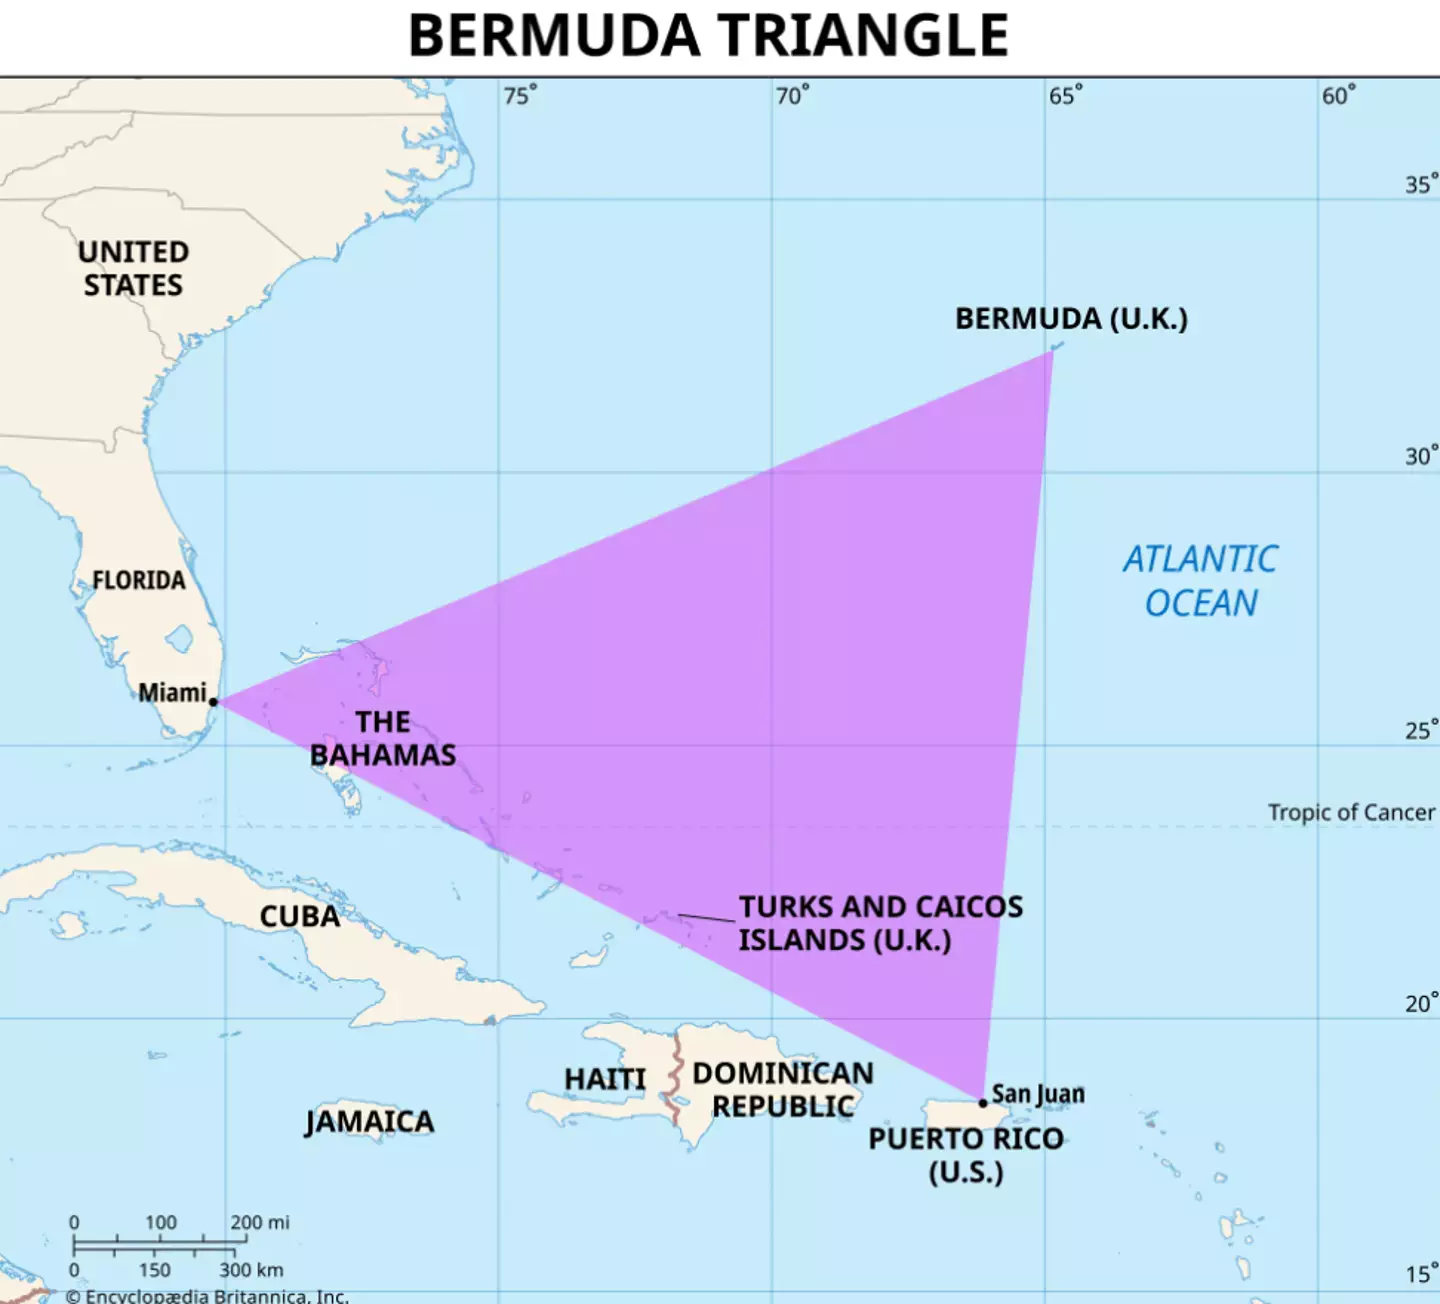 The Bermuda Triangle has been a mystery for over 70 years.